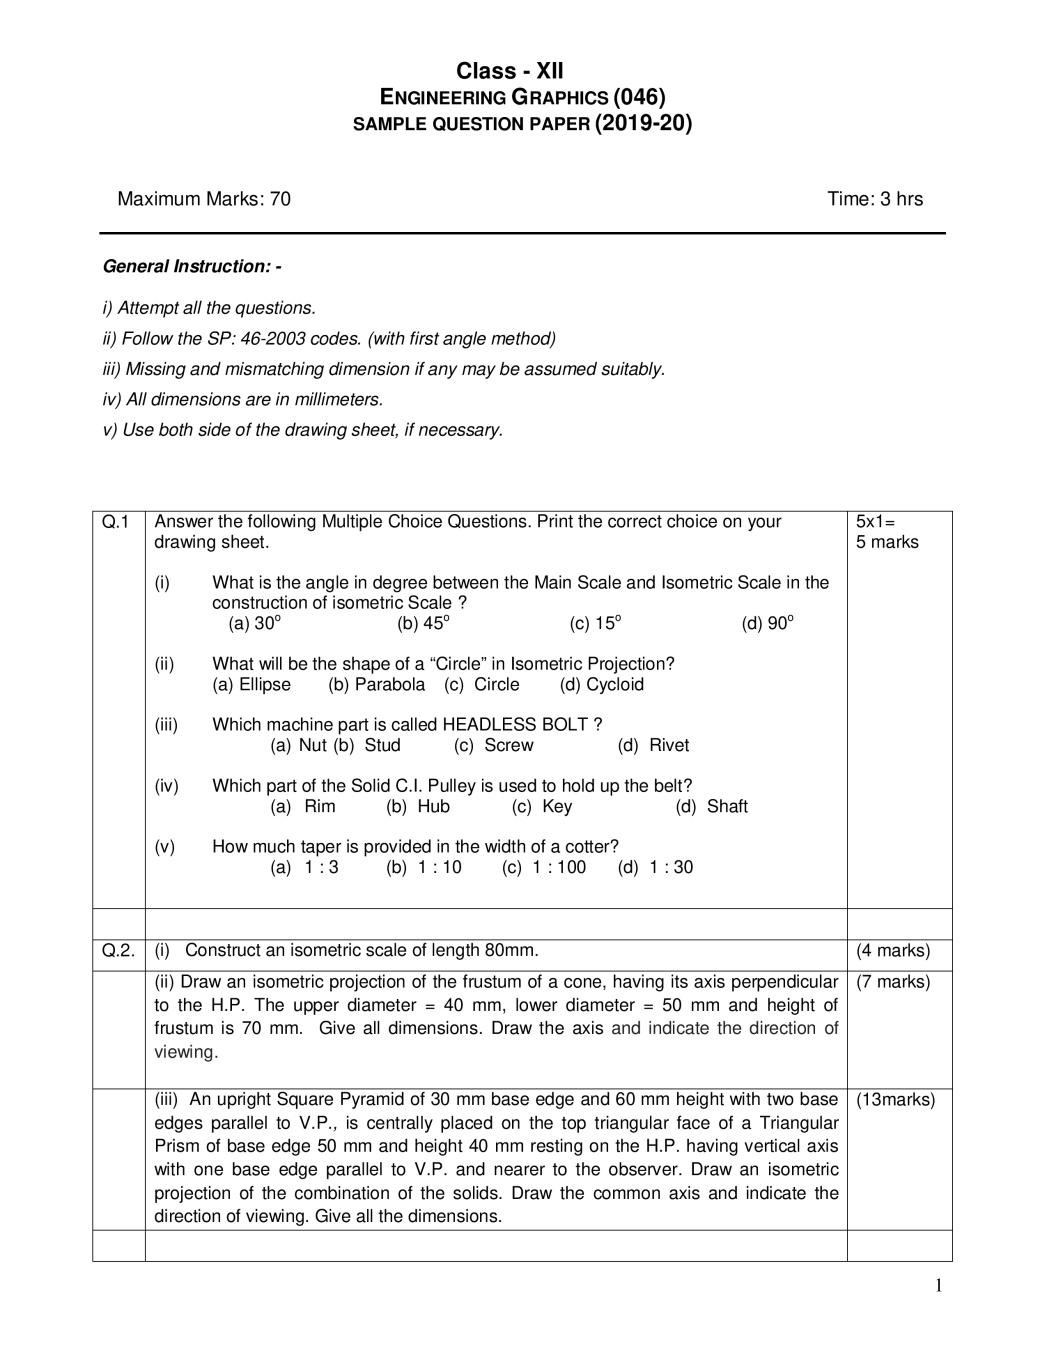 CBSE Class 12 Sample Paper 2020 for Engineering Graphics - Page 1